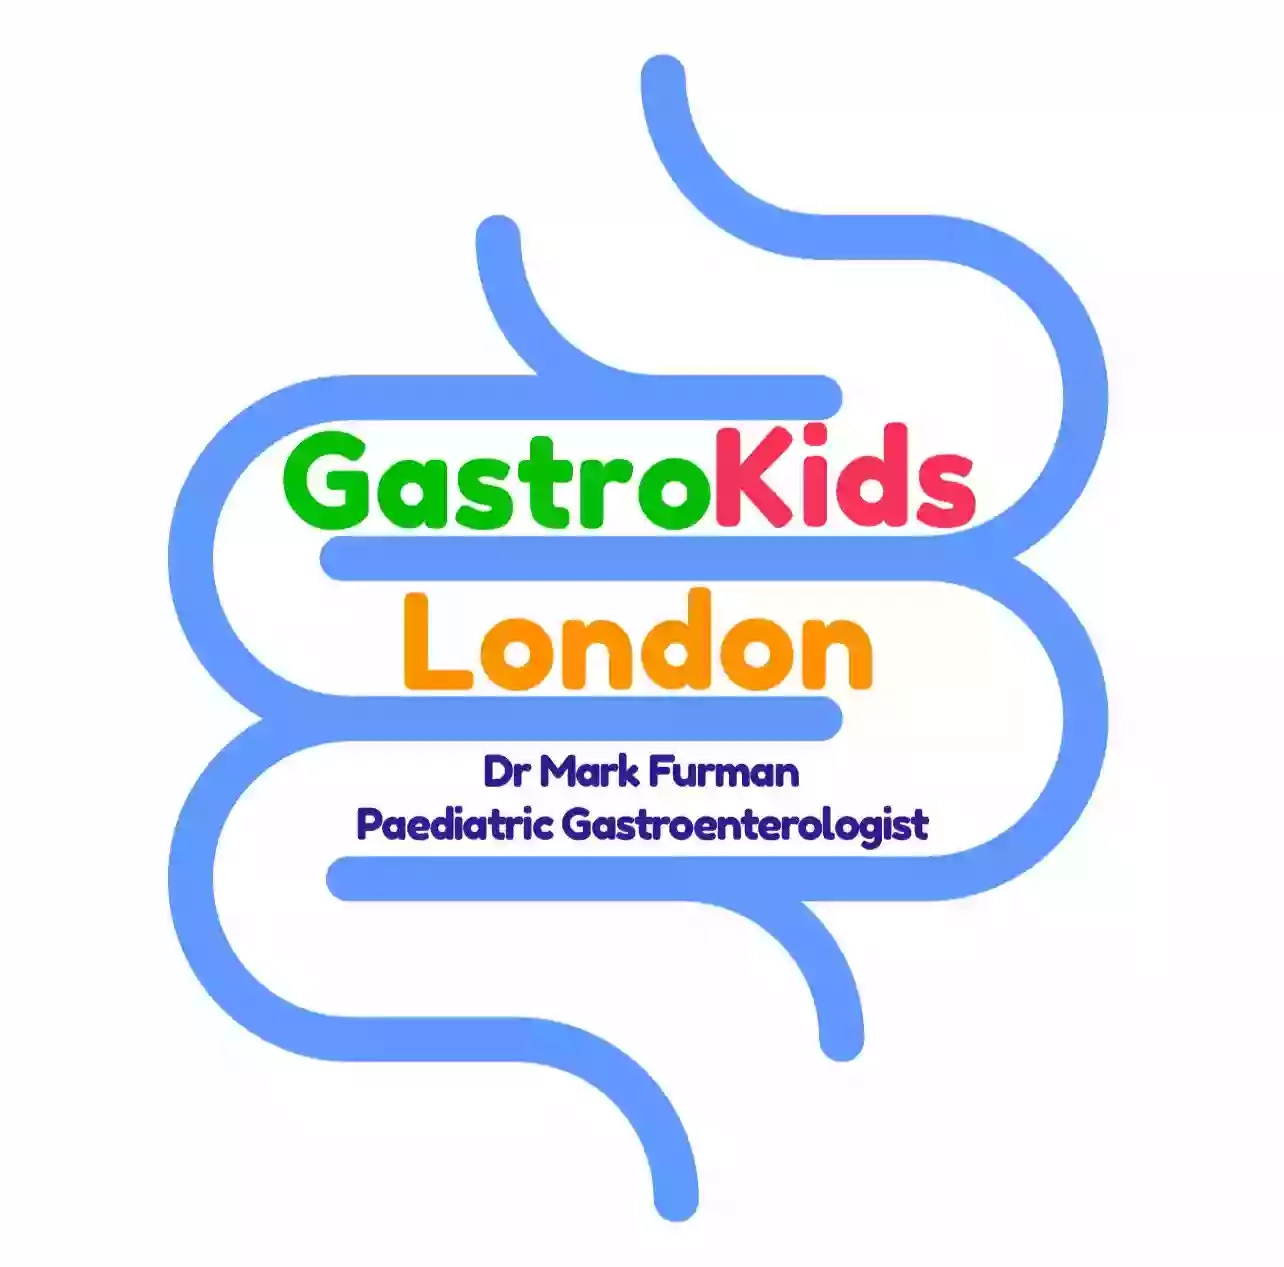 Dr Mark Furman Paediatric Gastroenterologist - FACE TO FACE, TELEPHONE AND VIDEO CONSULTATIONS AVAILABLE.